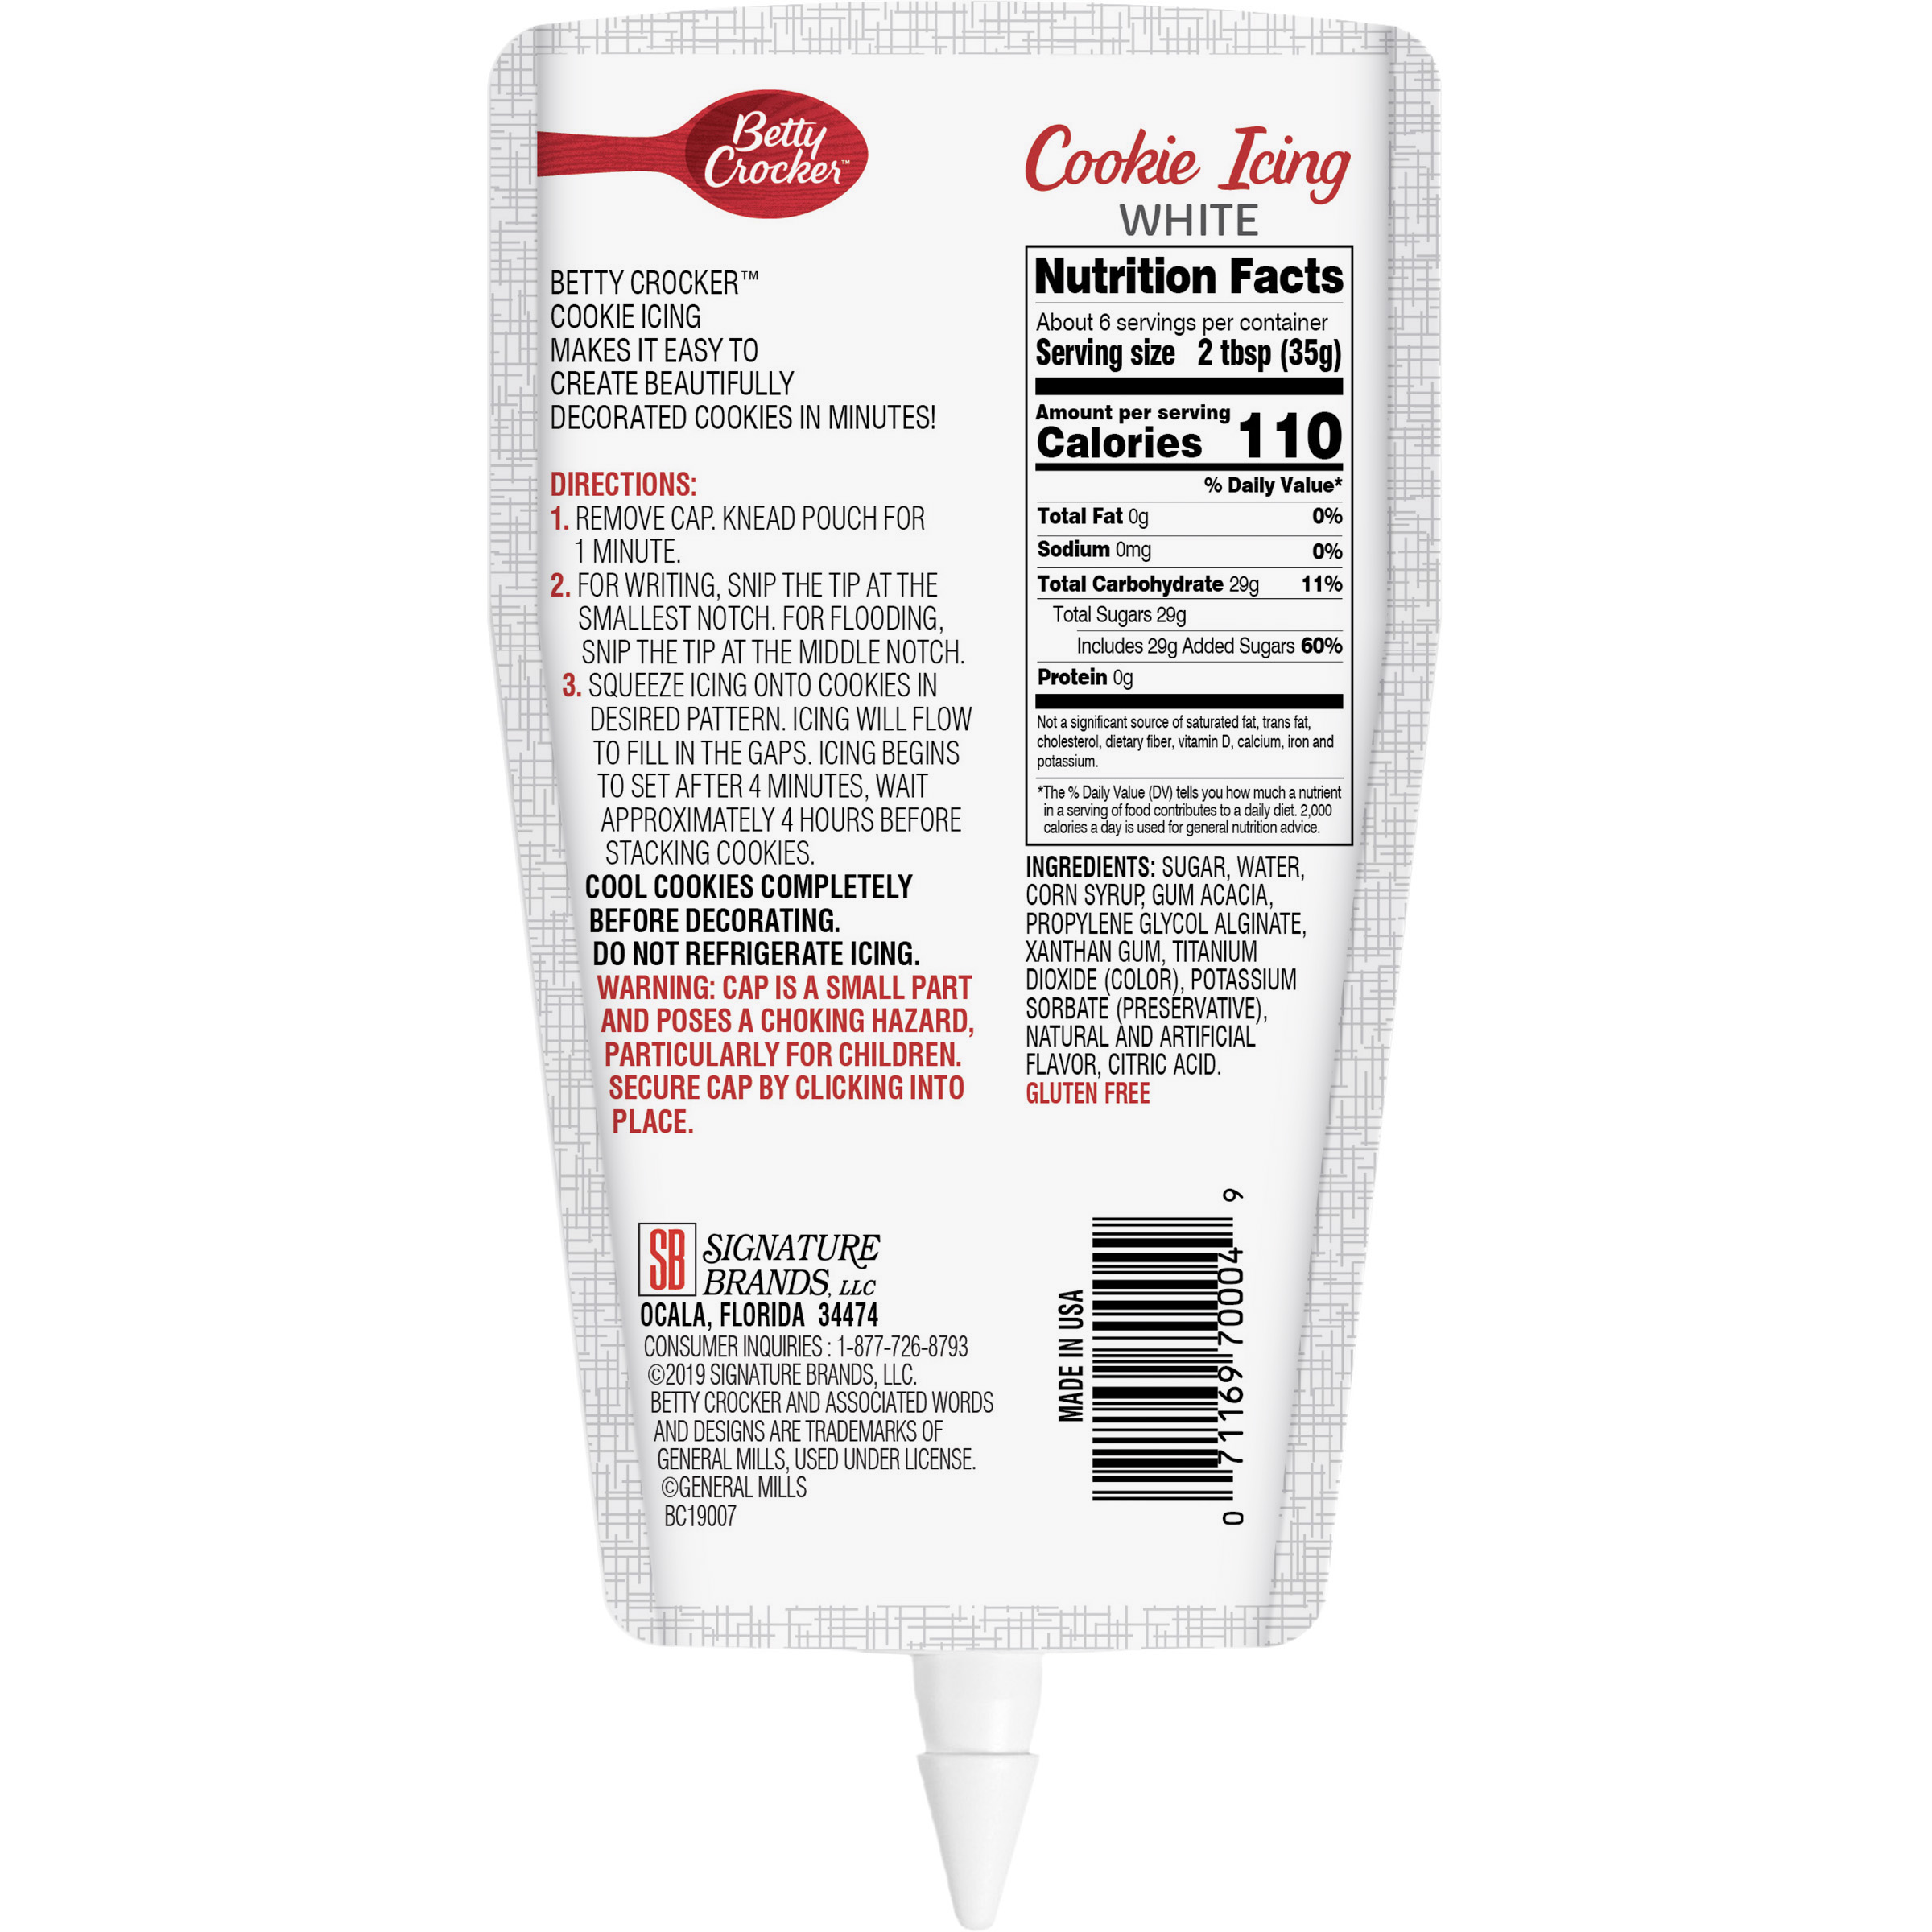 Betty Crocker White Cookie Decorating Icing, Vanilla Flavor, 7 Ounce Pouch - image 2 of 6